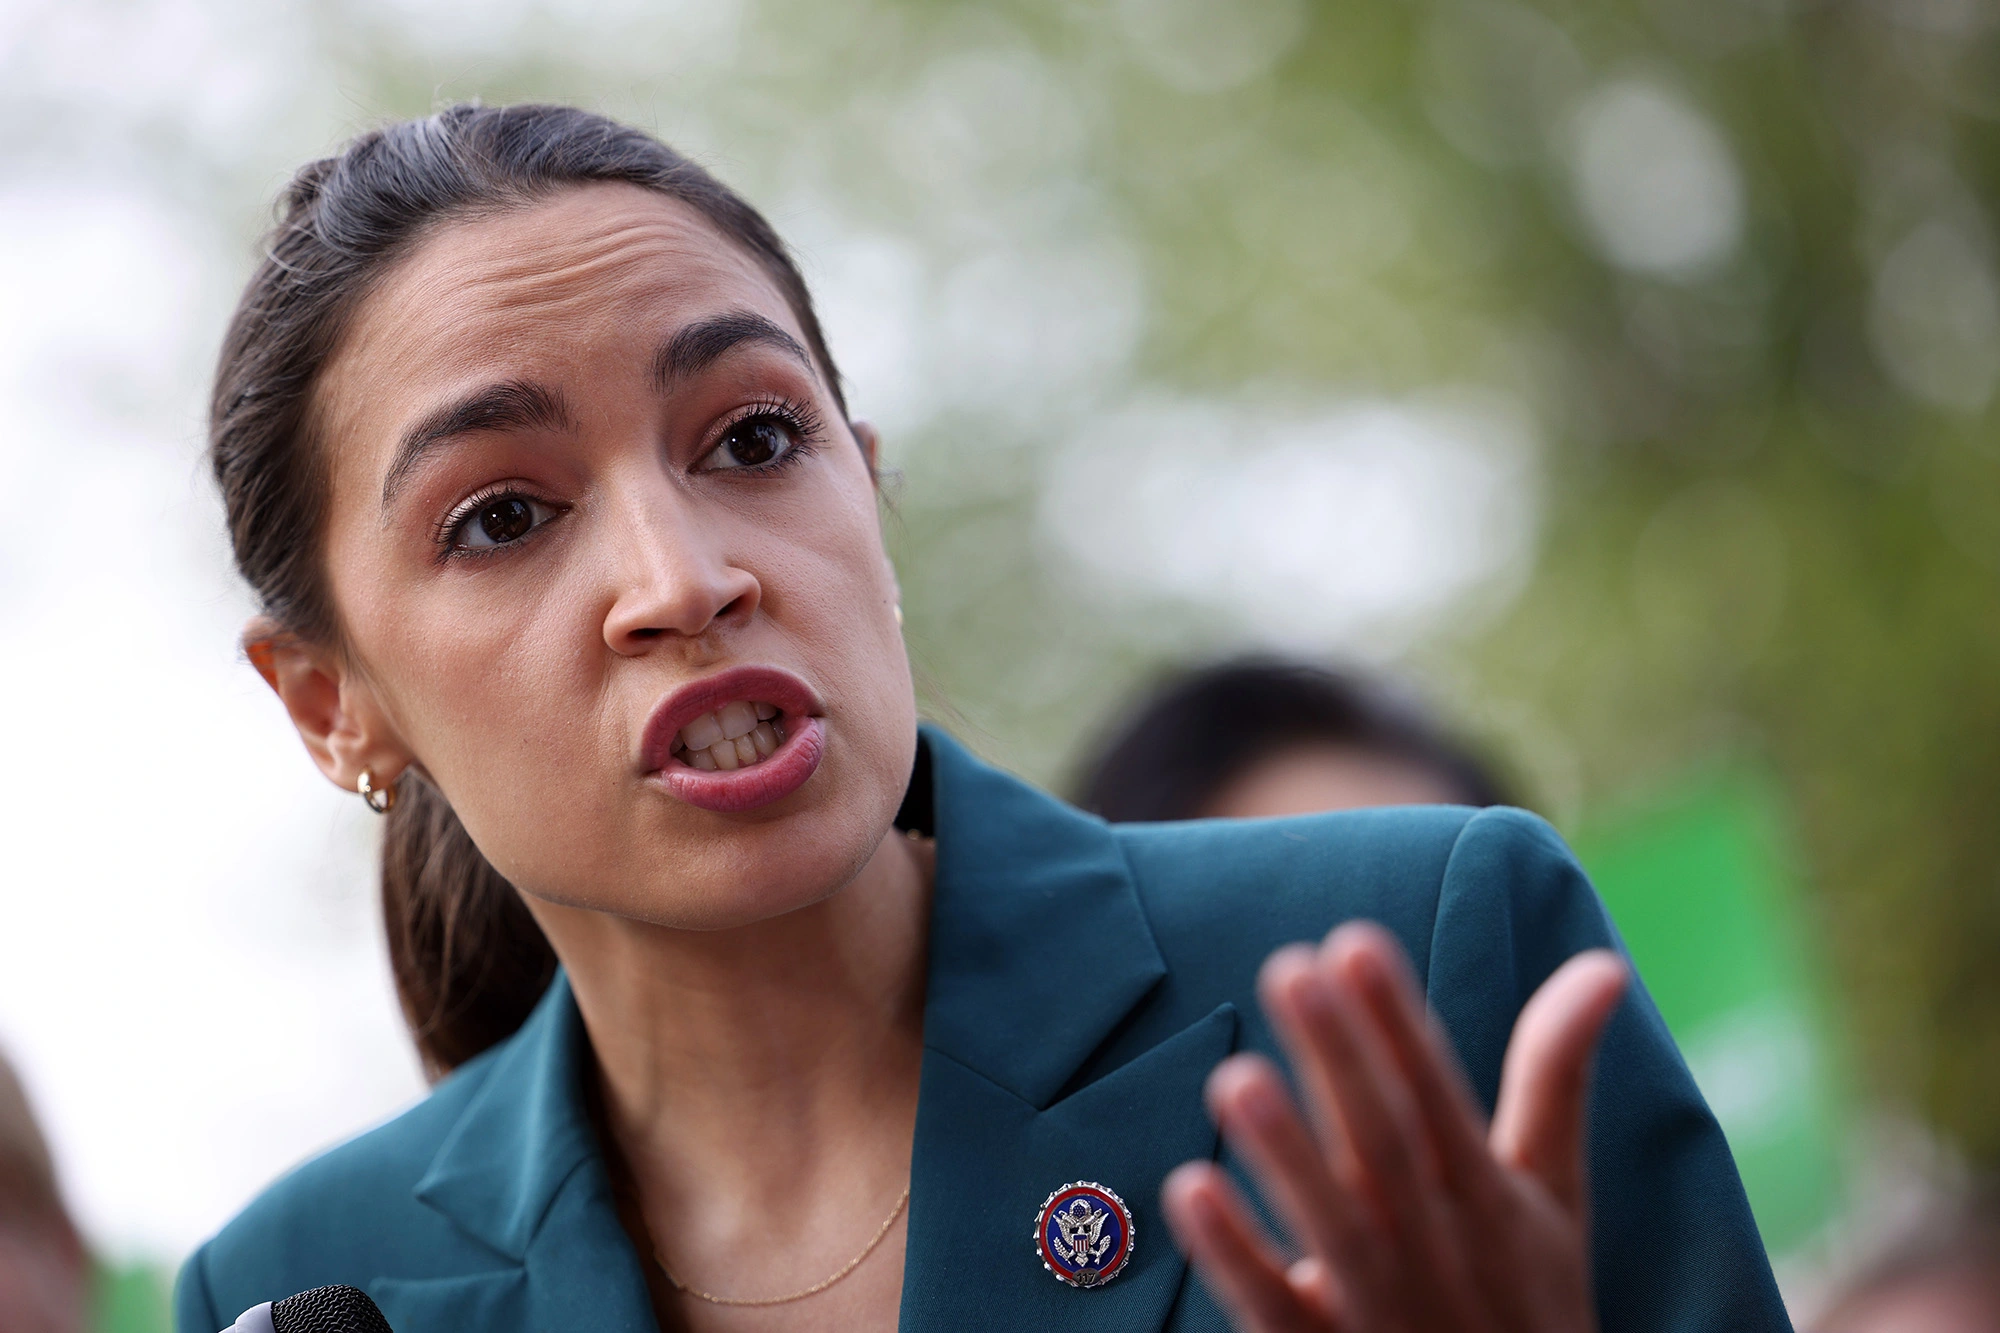 AOC, the Socialist Darling, Makes a Dim-Witted Comparison